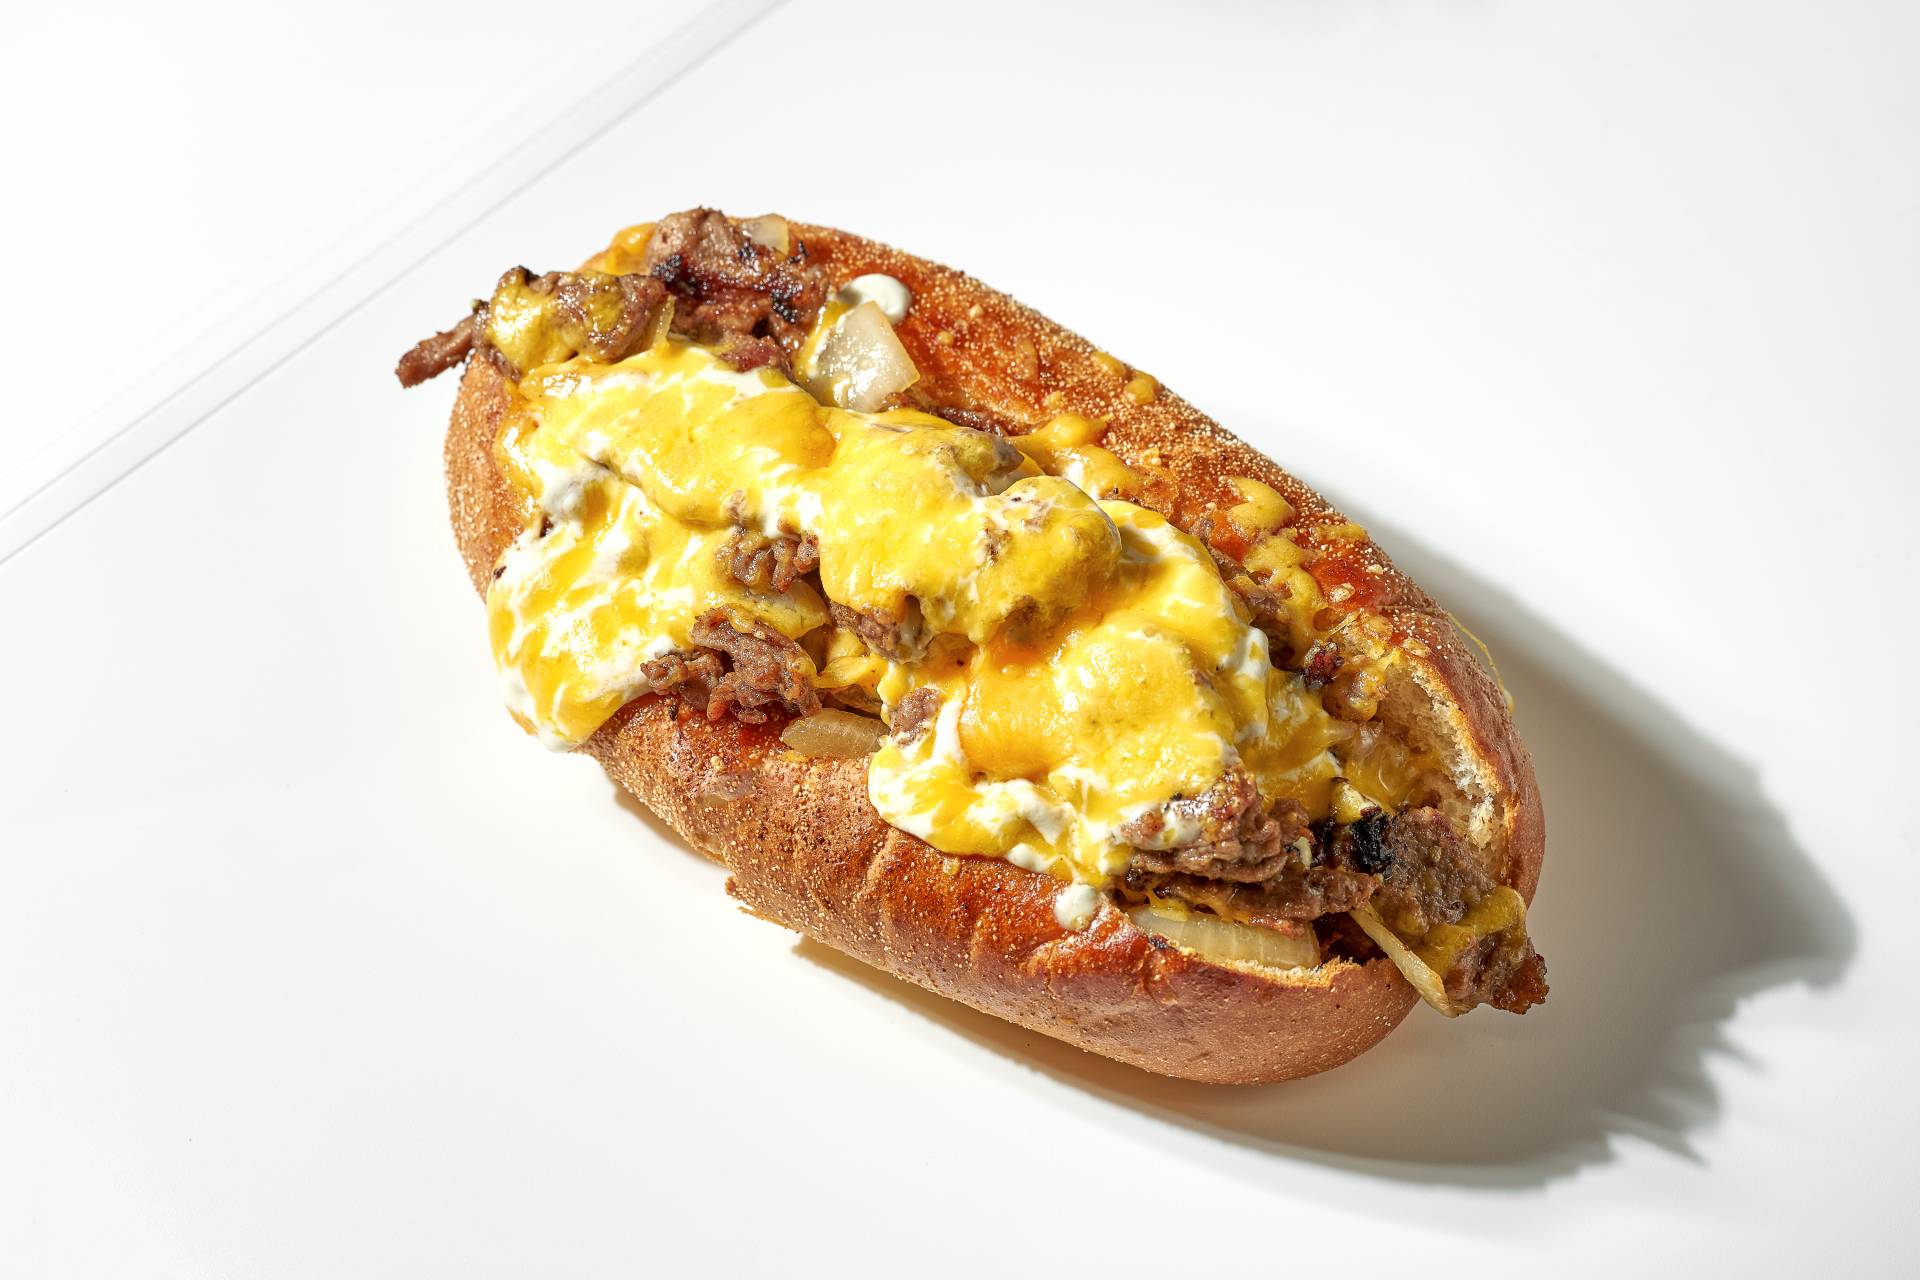 Philly Cheesesteak on a Bun - Low Fat